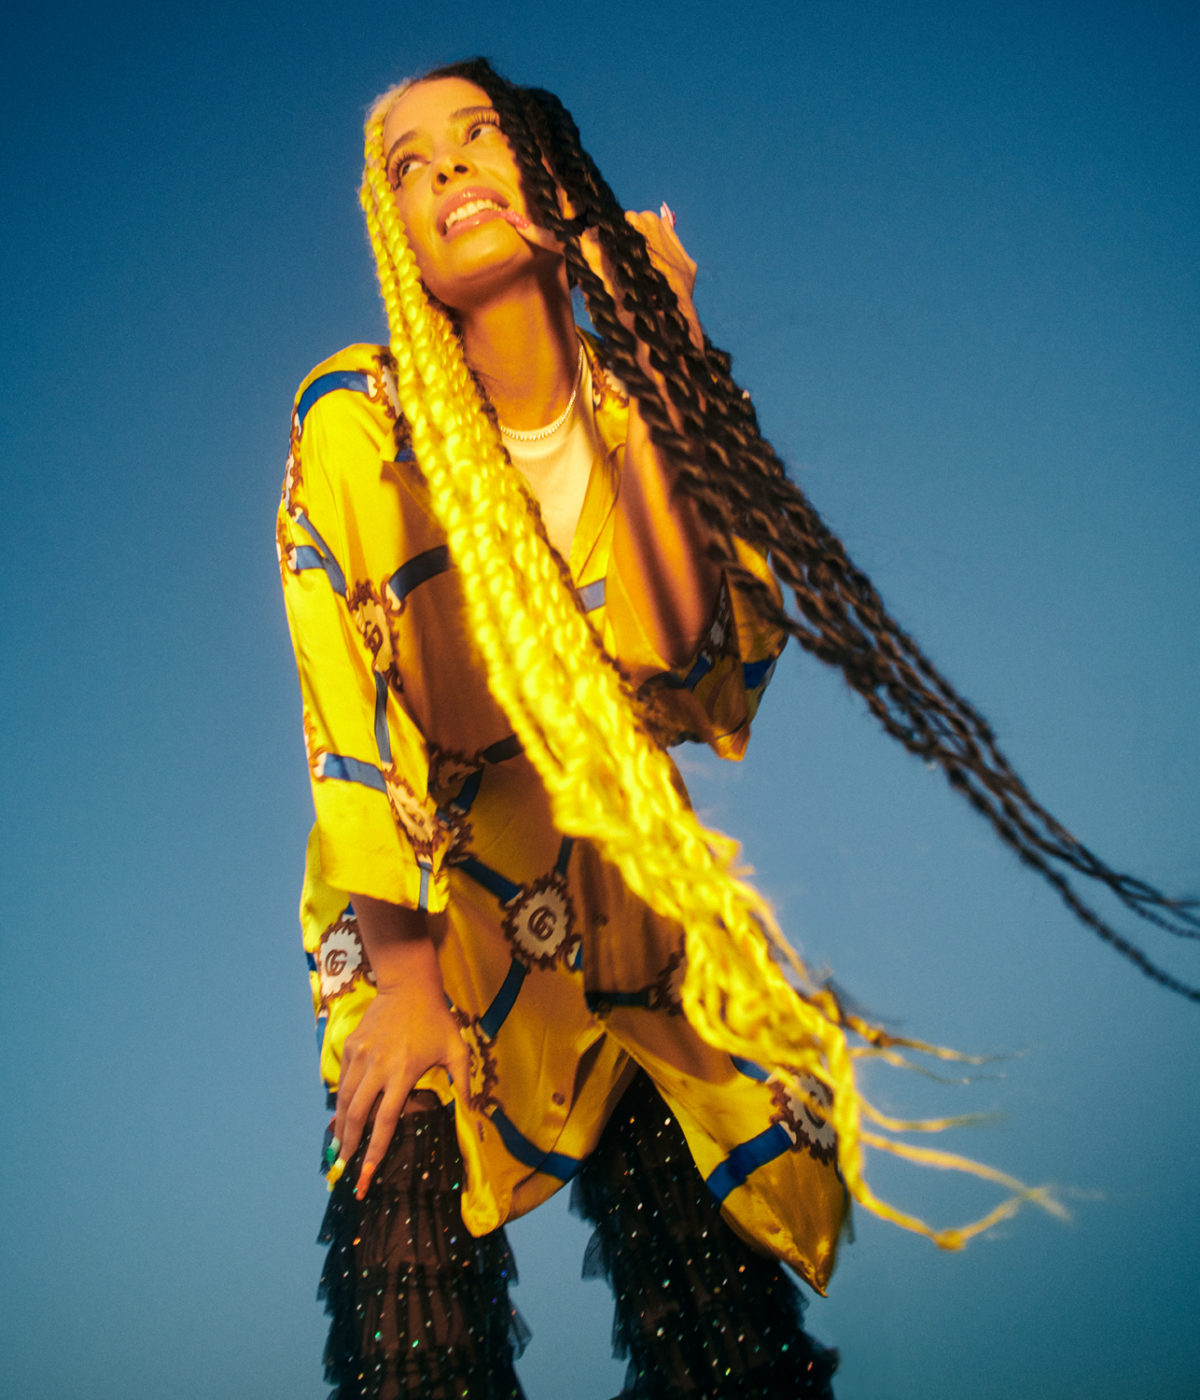 person with long yellow and black dreads